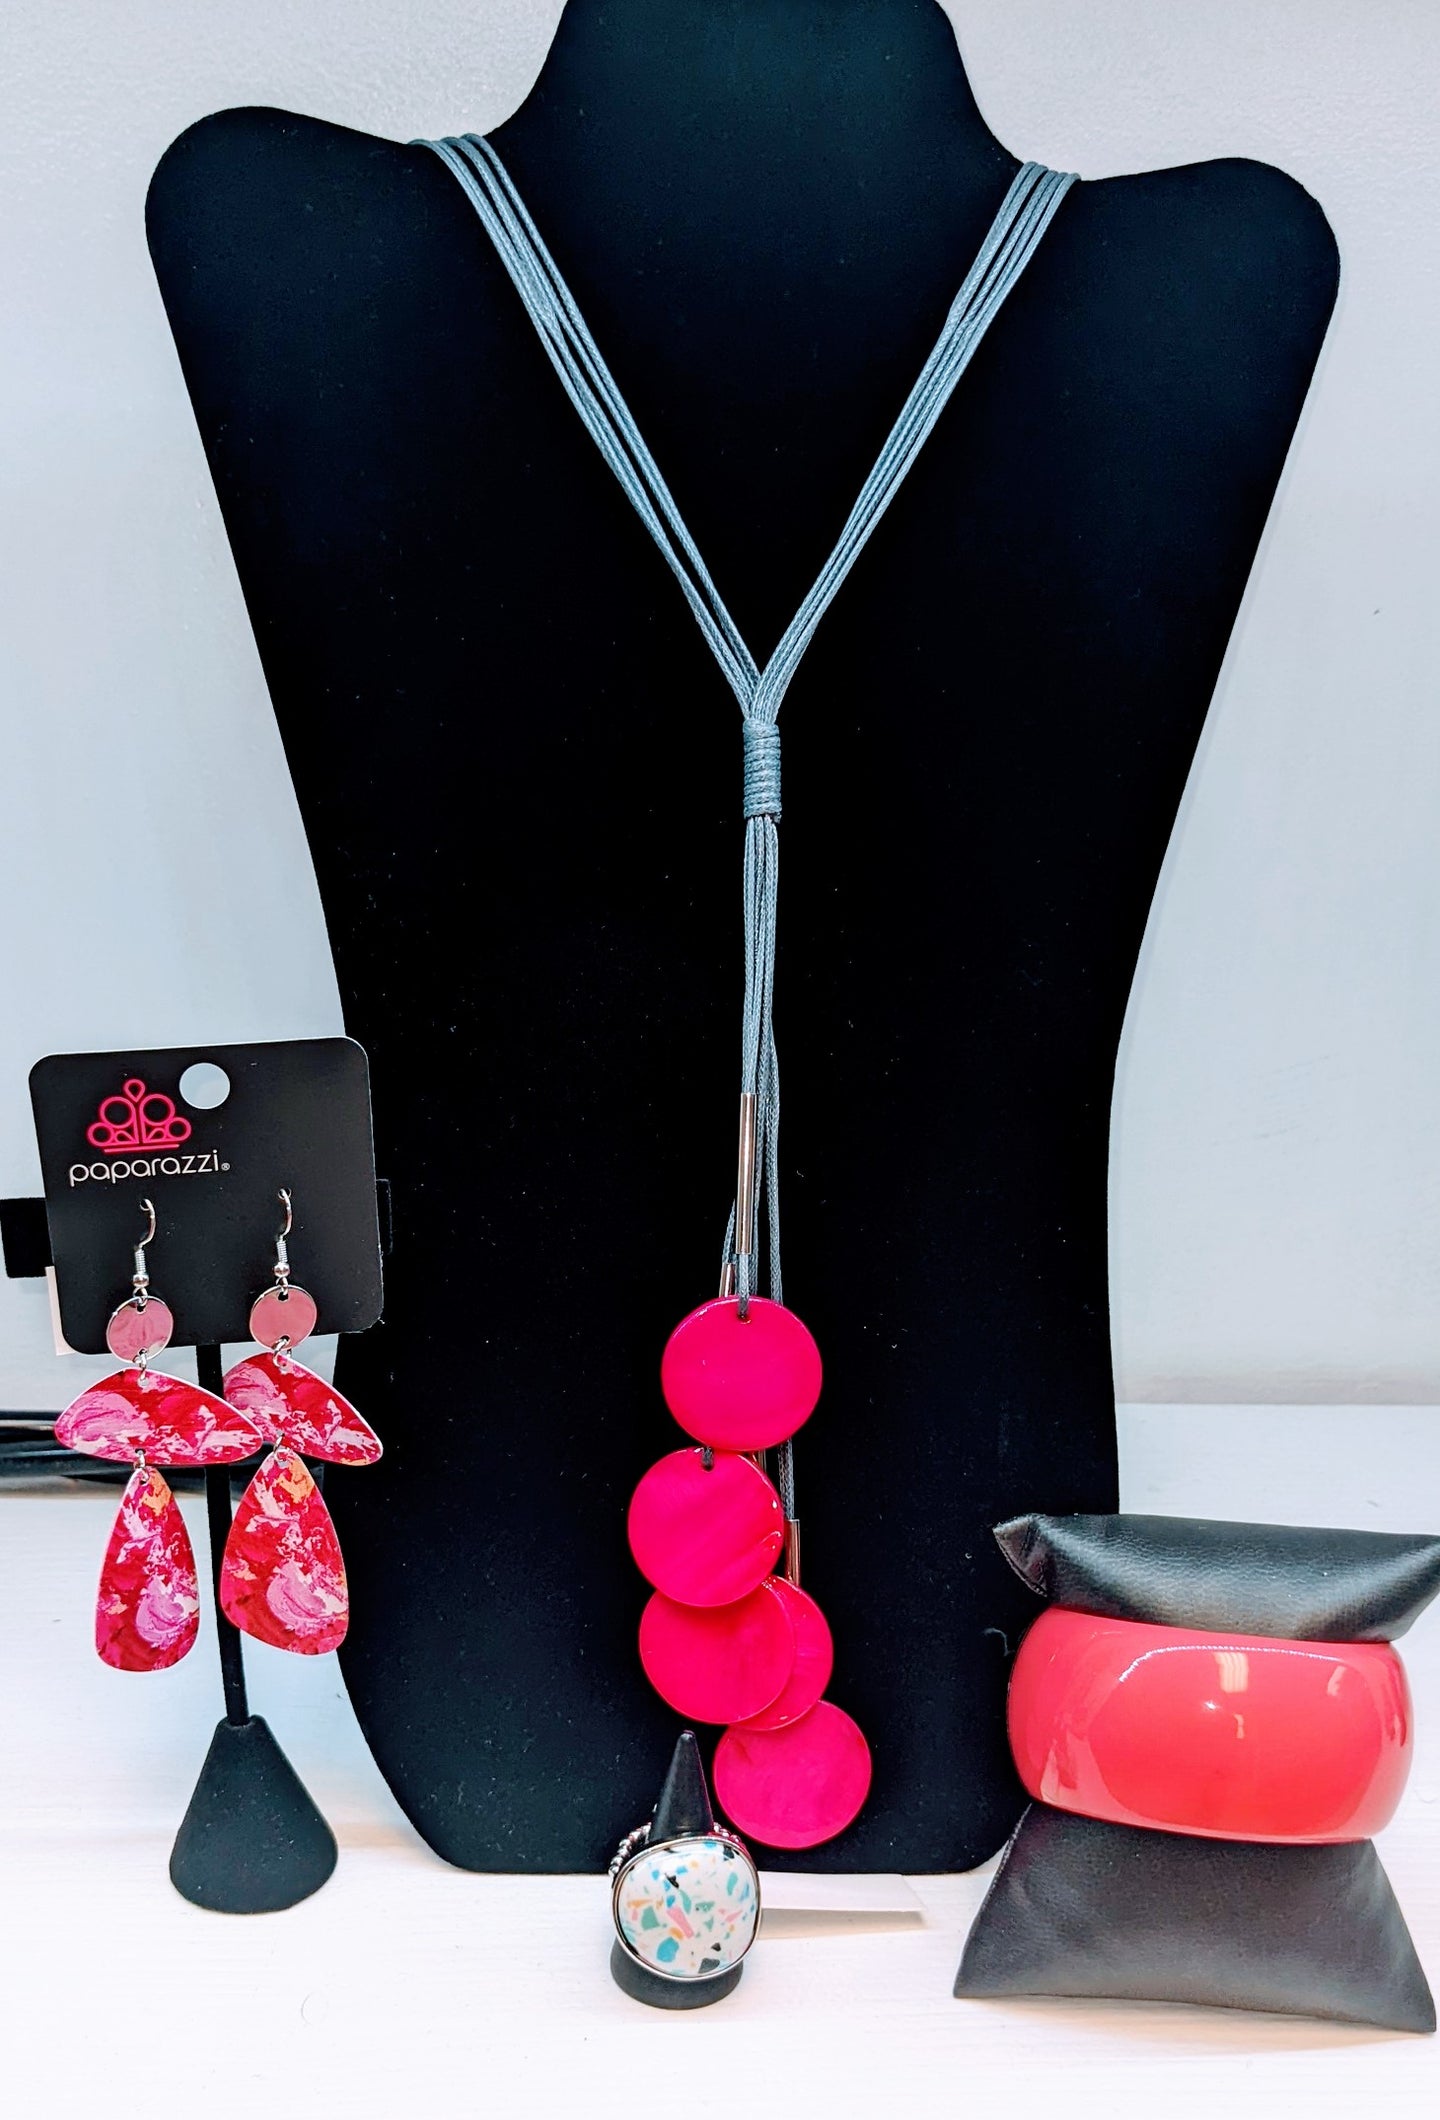 The Pink Look - VJ Bedazzled Jewelry